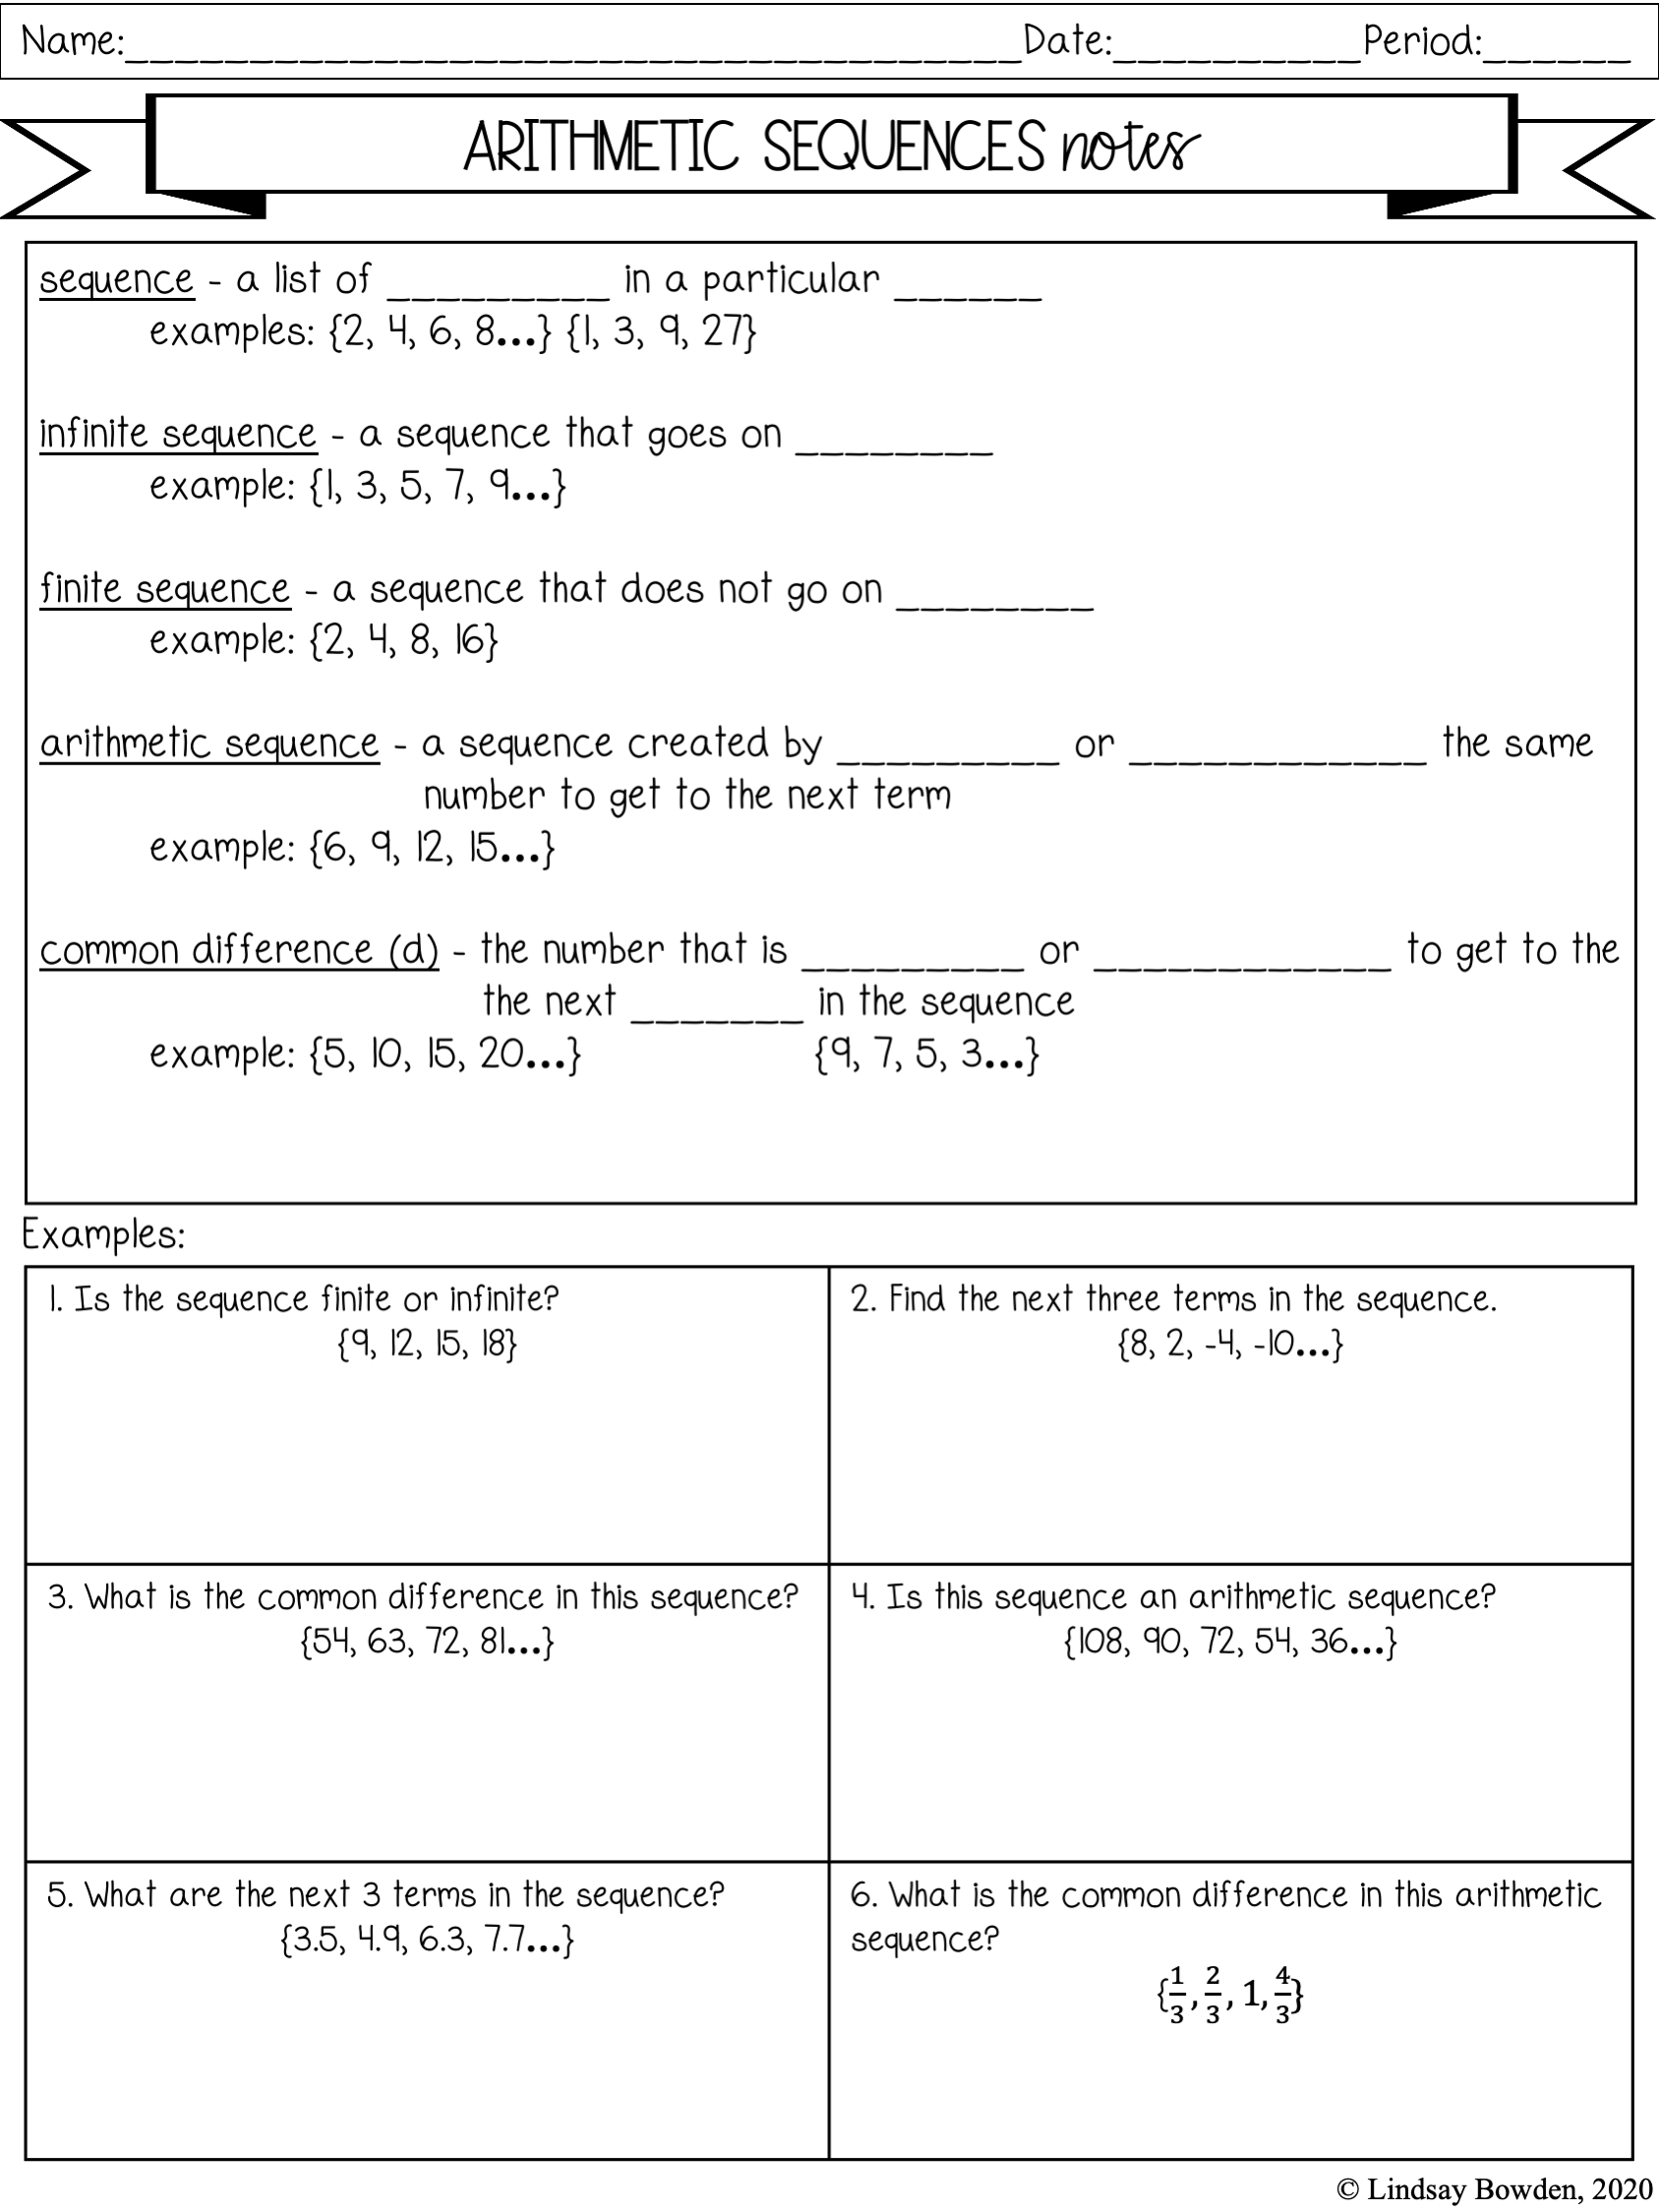 Arithmetic Sequences Notes and Worksheets - Lindsay Bowden Throughout Arithmetic Sequence Worksheet Answers